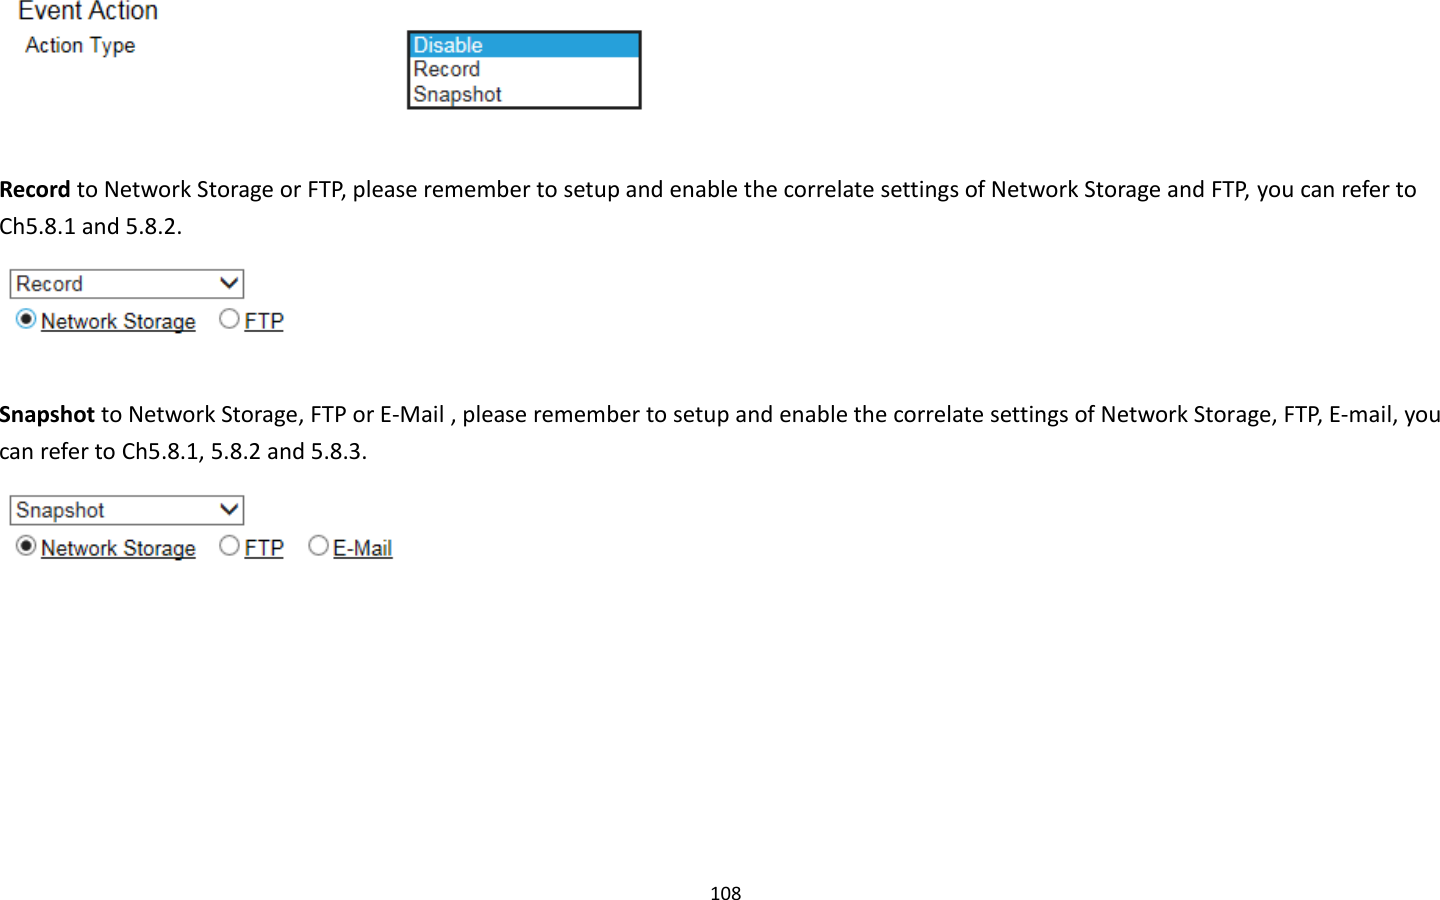 108    Record to Network Storage or FTP, please remember to setup and enable the correlate settings of Network Storage and FTP, you can refer to Ch5.8.1 and 5.8.2.   Snapshot to Network Storage, FTP or E-Mail , please remember to setup and enable the correlate settings of Network Storage, FTP, E-mail, you can refer to Ch5.8.1, 5.8.2 and 5.8.3.    